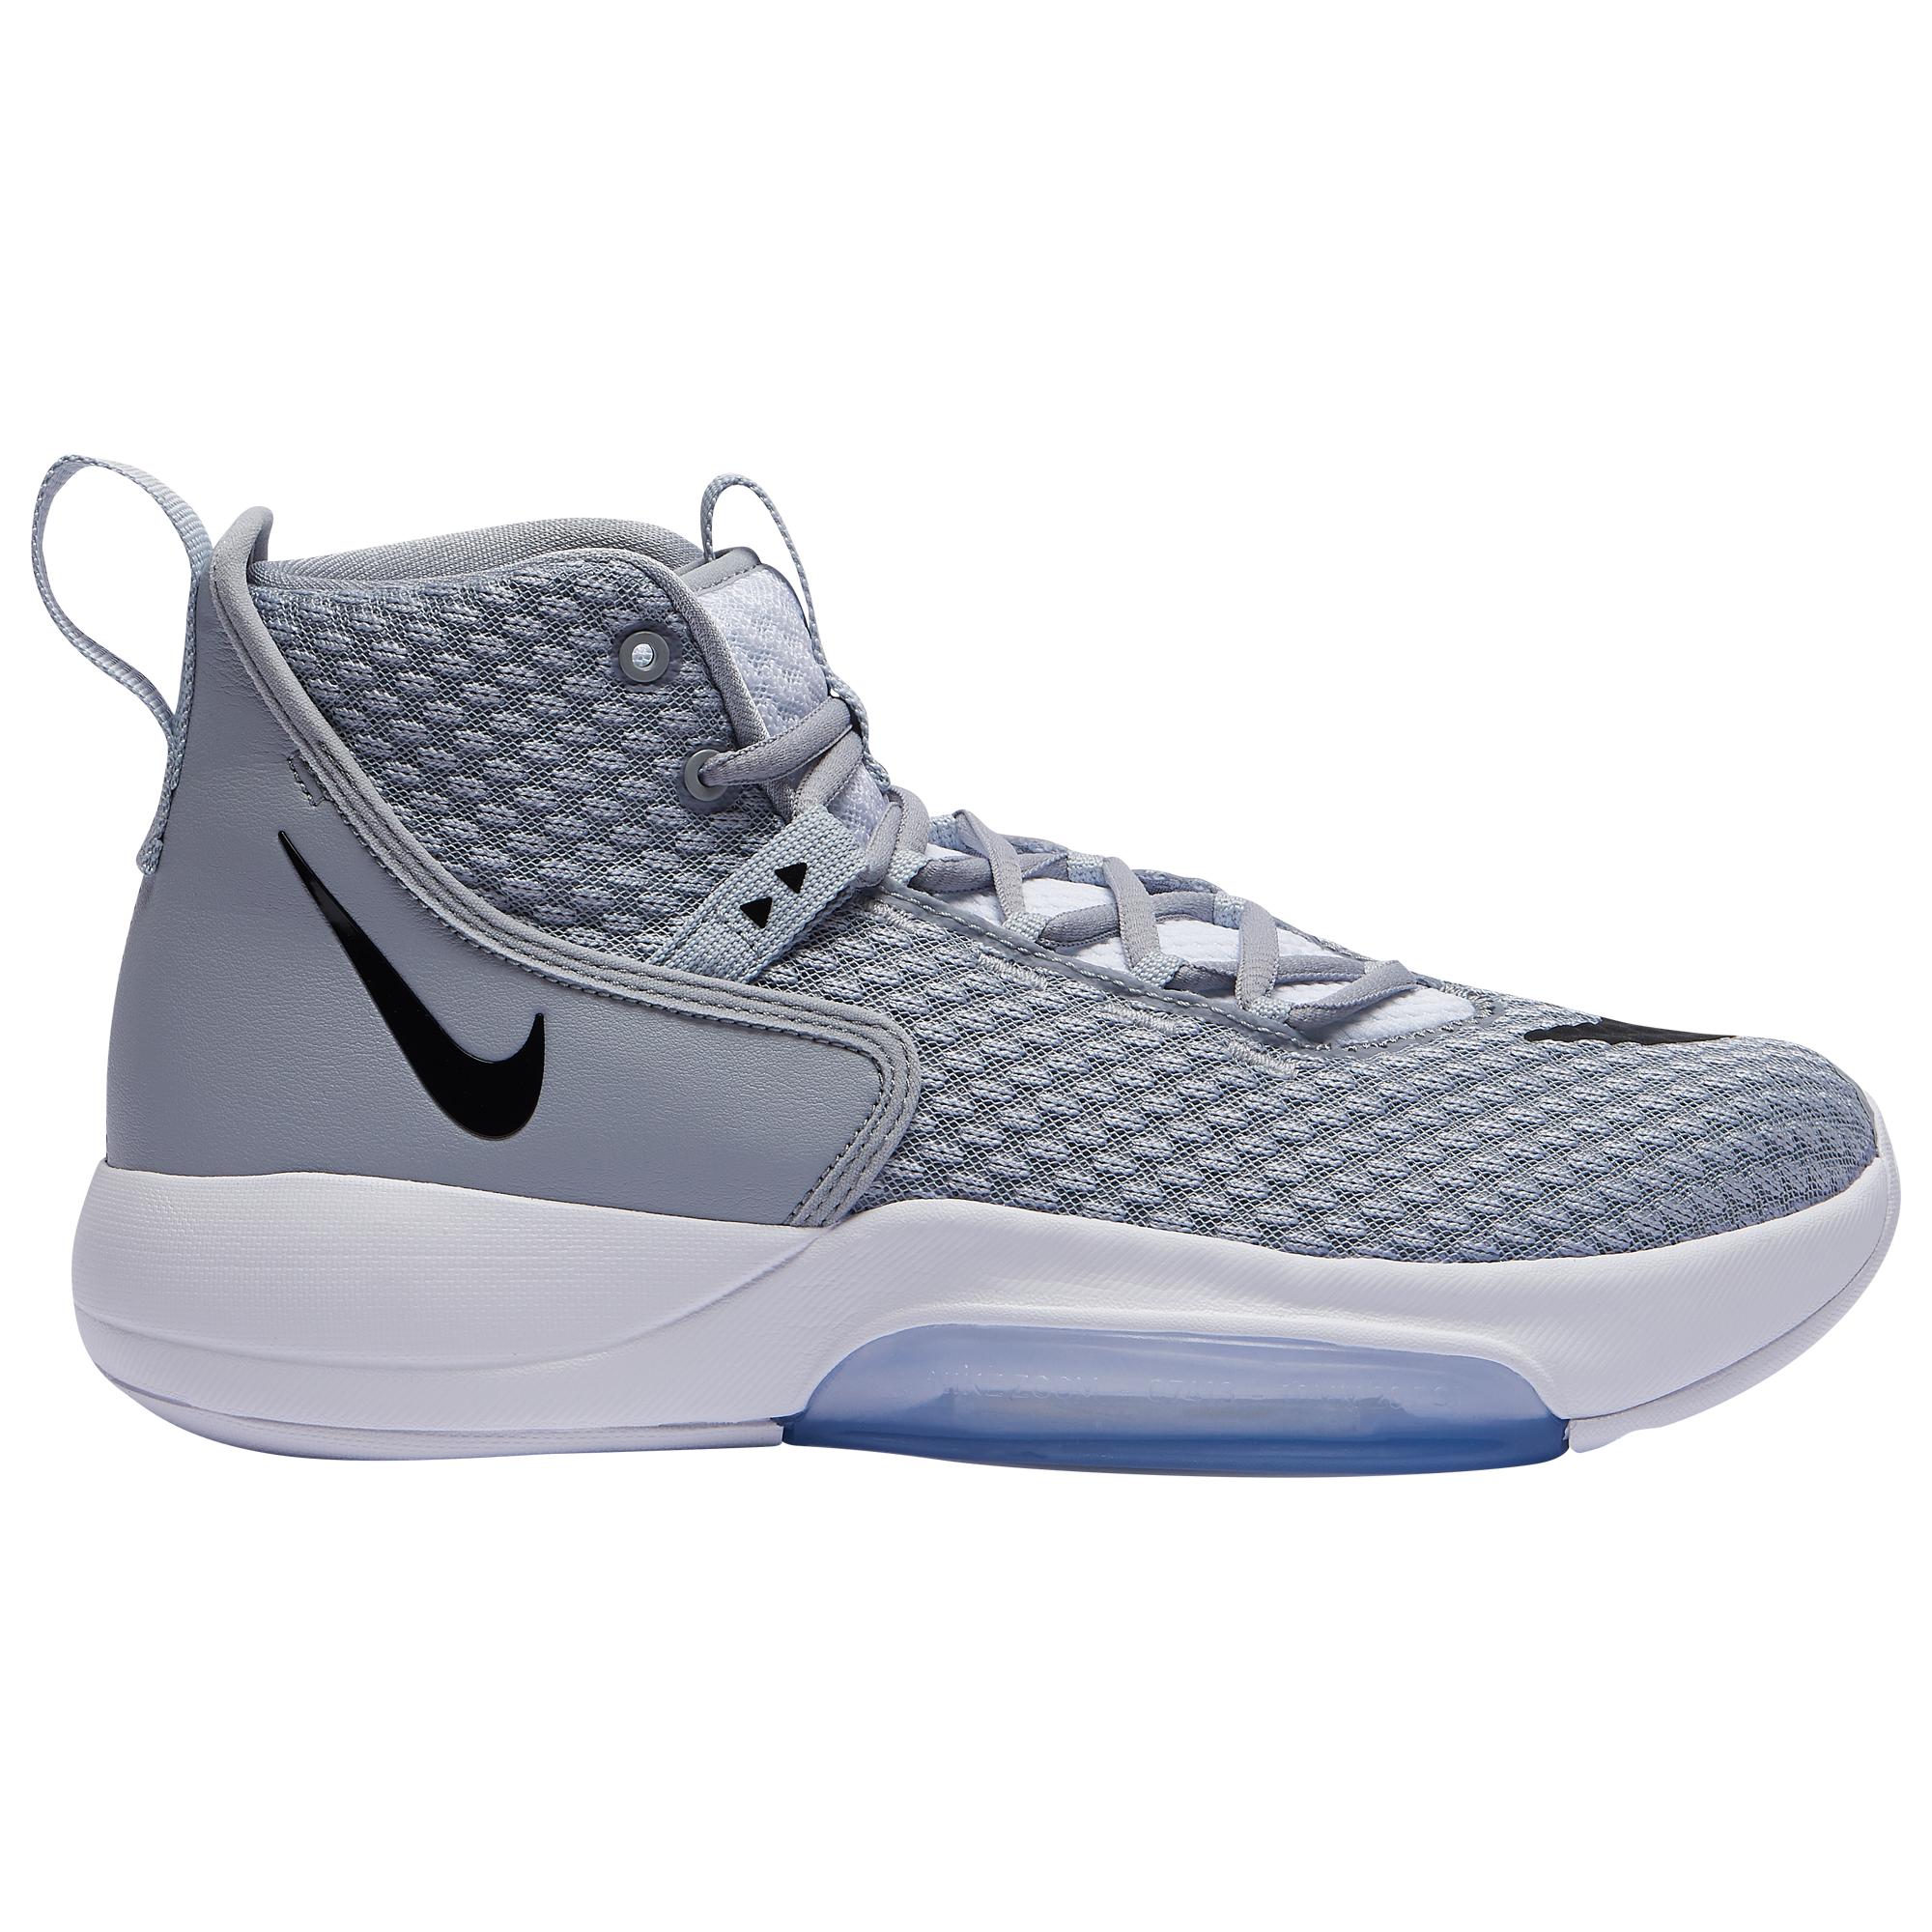 Nike Rubber Zoom Rize in Gray for Men - Save 21% - Lyst